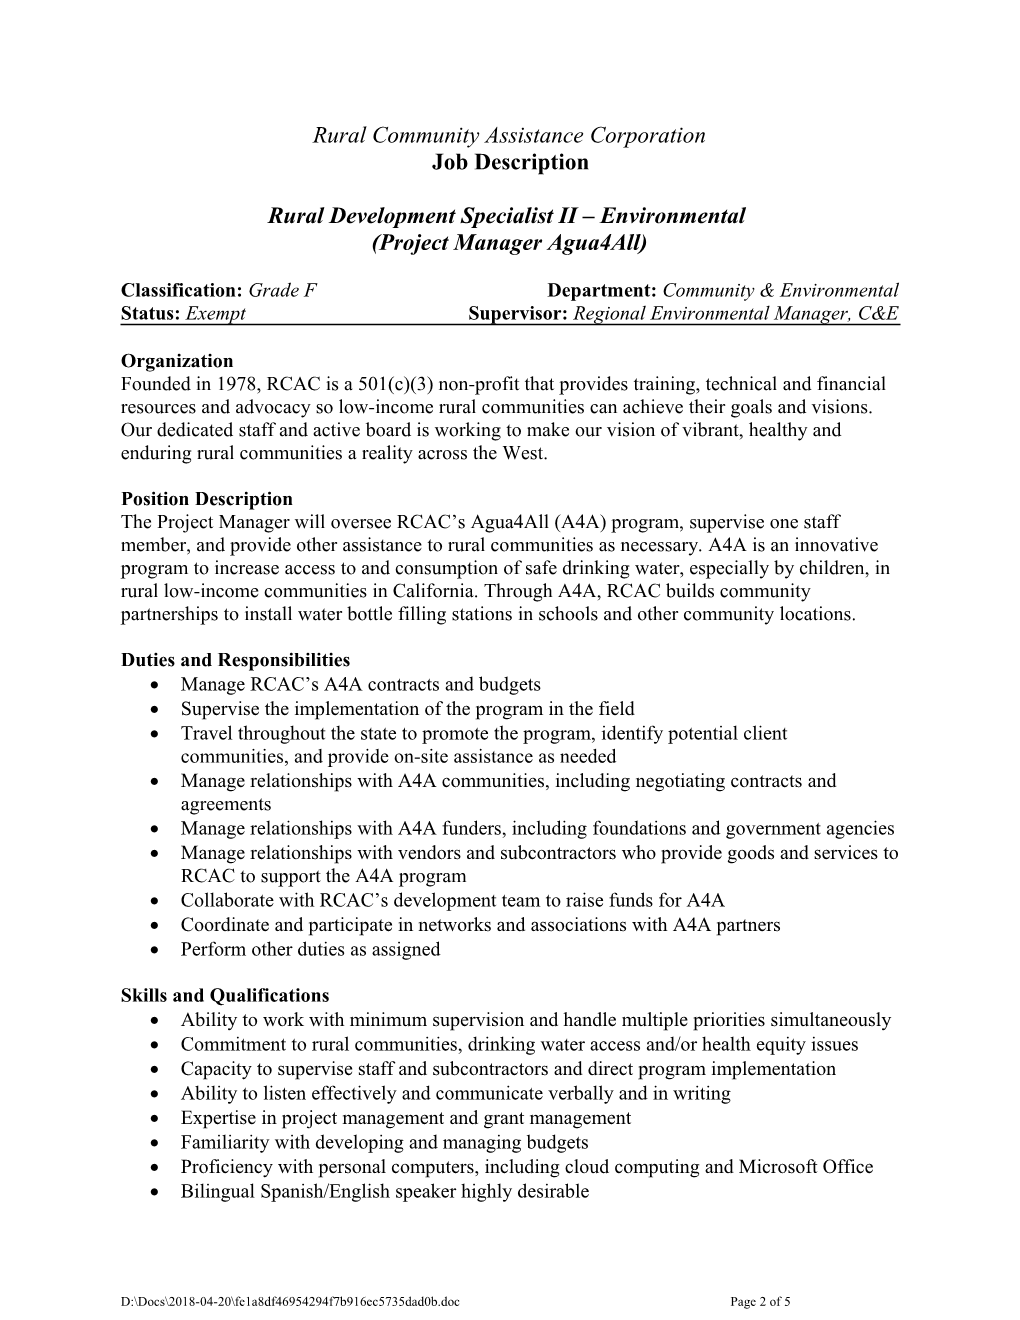 Re: Rural Development Specialist II Environmental (Agua4all Project Manager)